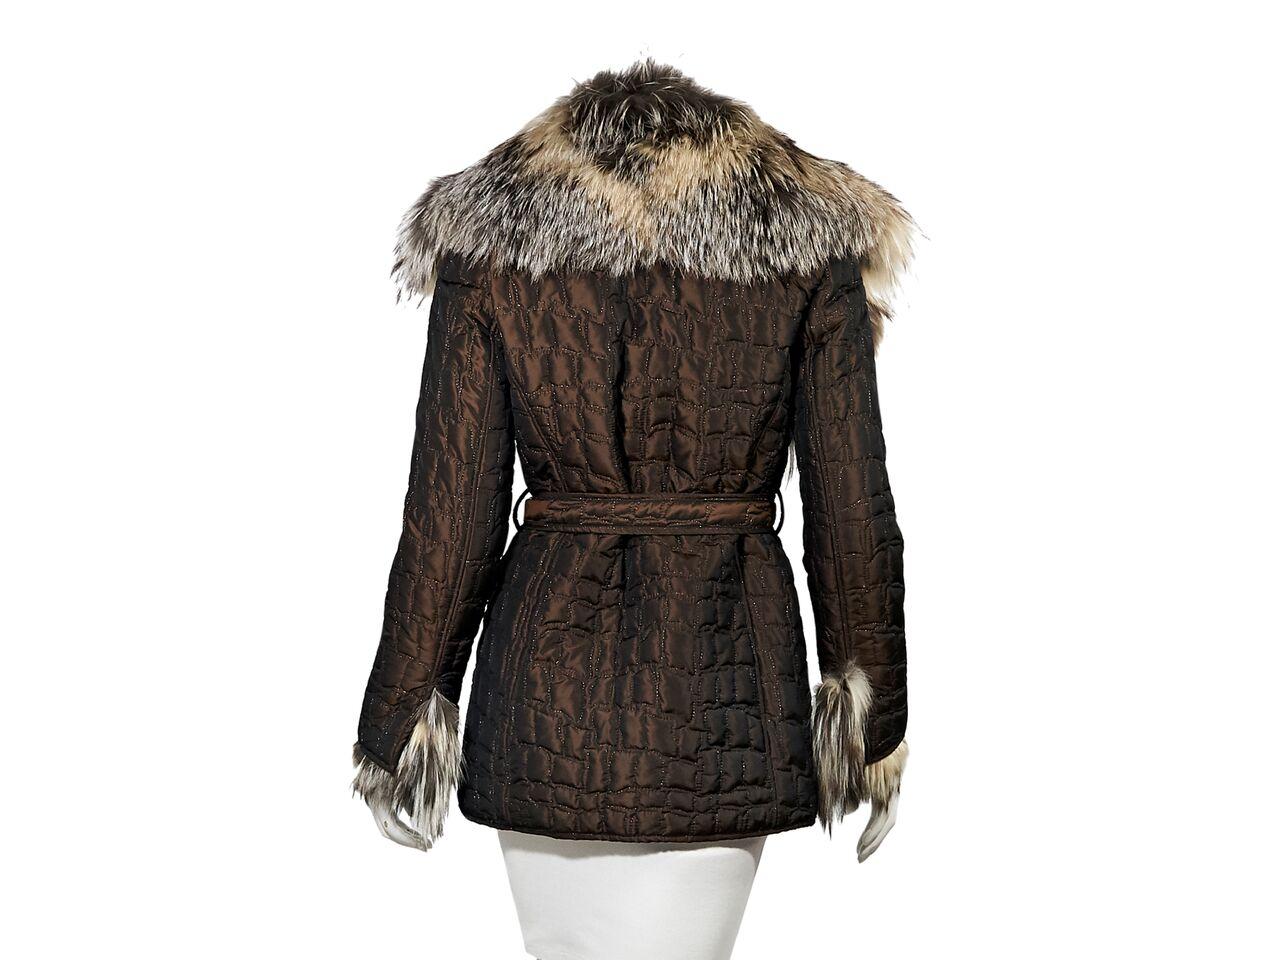 Product details:  Brown quilted coat by Escada.  Accented with metallic Lurex thread.  Trimmed with real silver fox fur.  Long sleeves.  Button-front closure.  Self-tie belted waist.  Waist slide pockets.  35